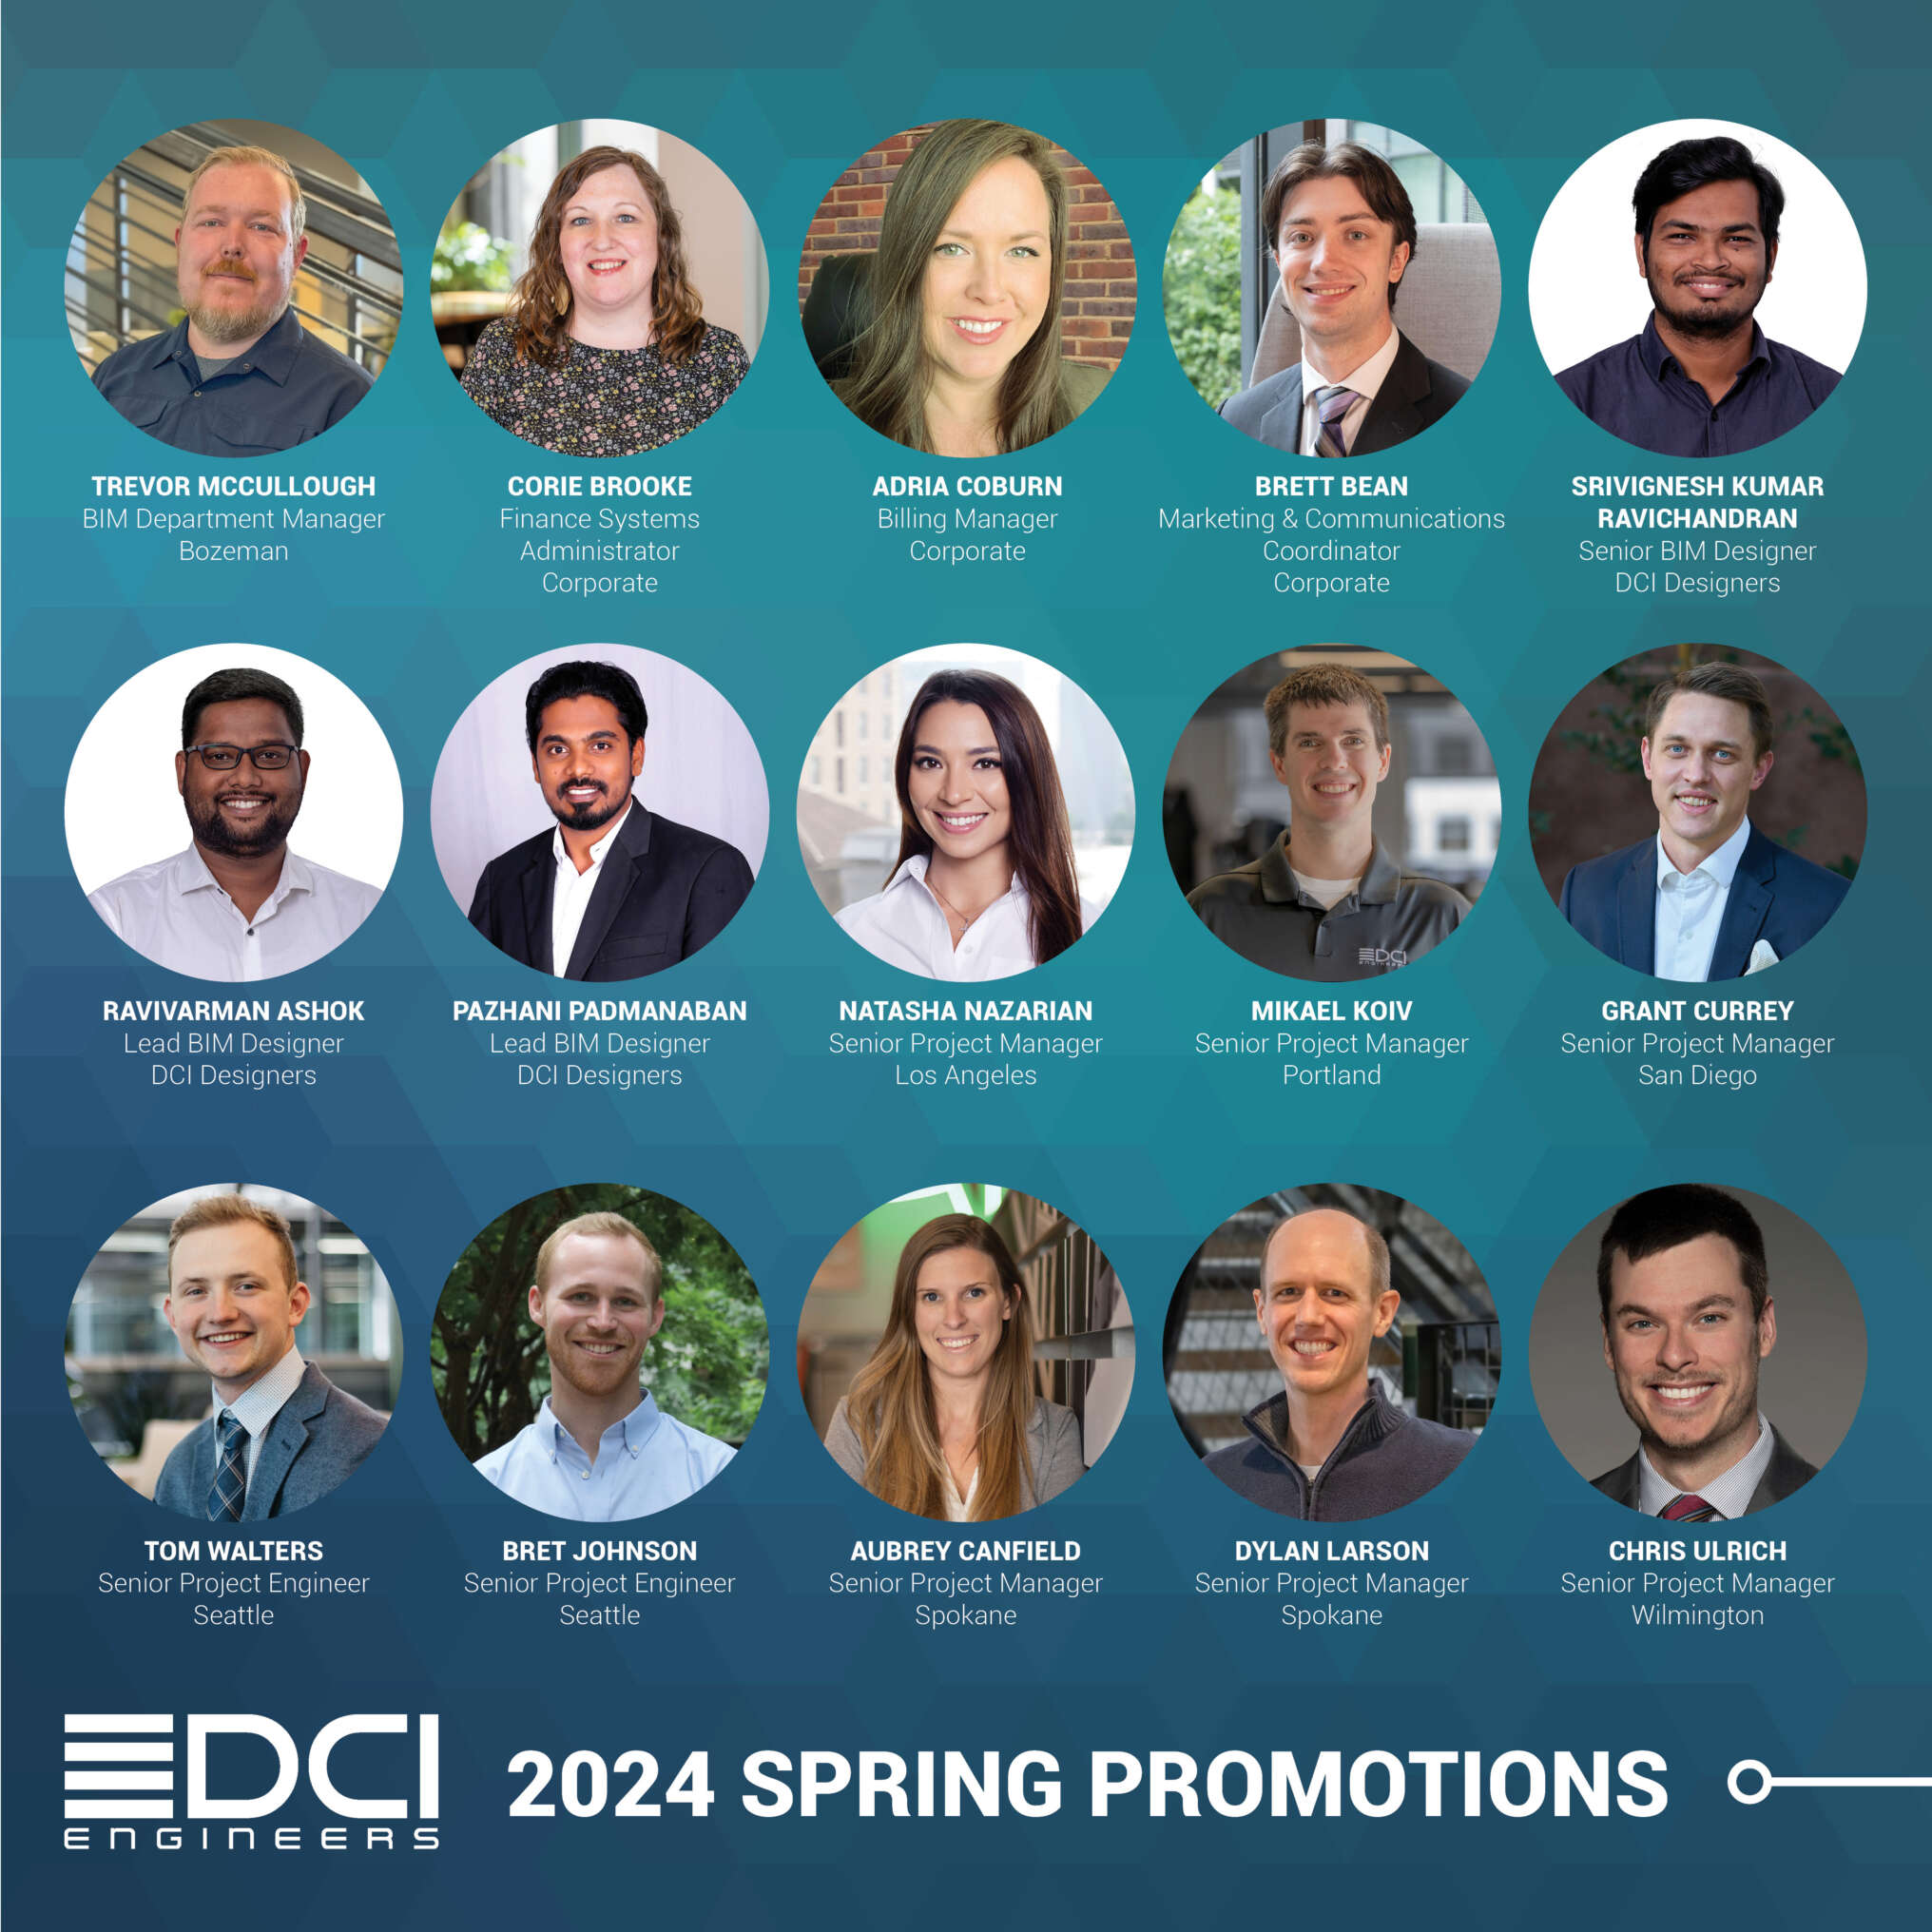 Spring 2024 Promotions social